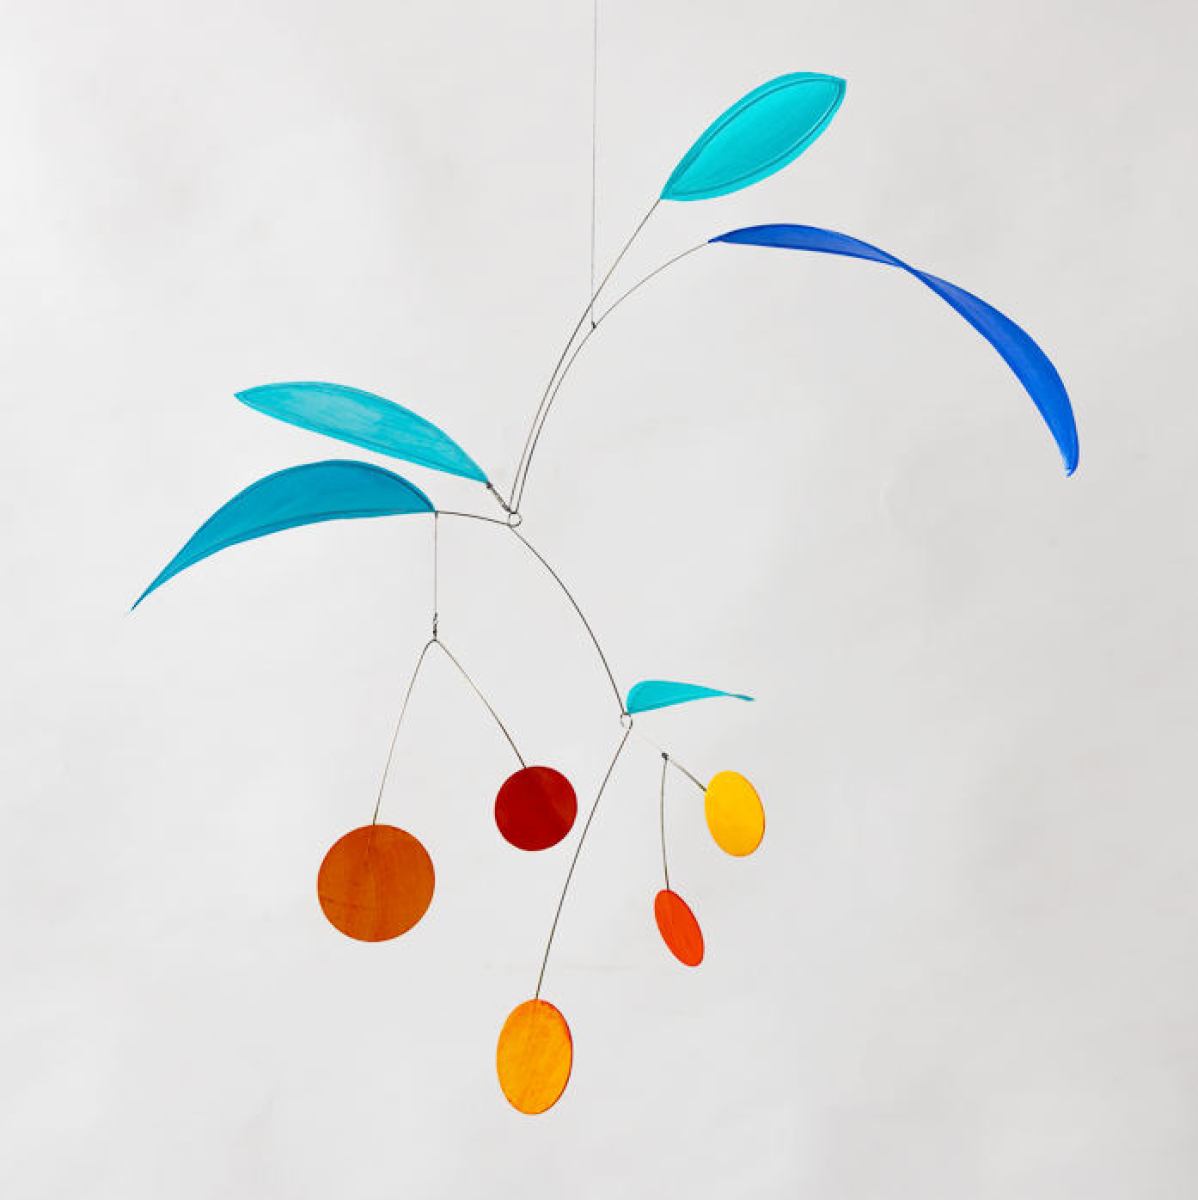 Colourful Art Mobile "Celoni" made of Hand-Painted Paper (50 x 60 cm)